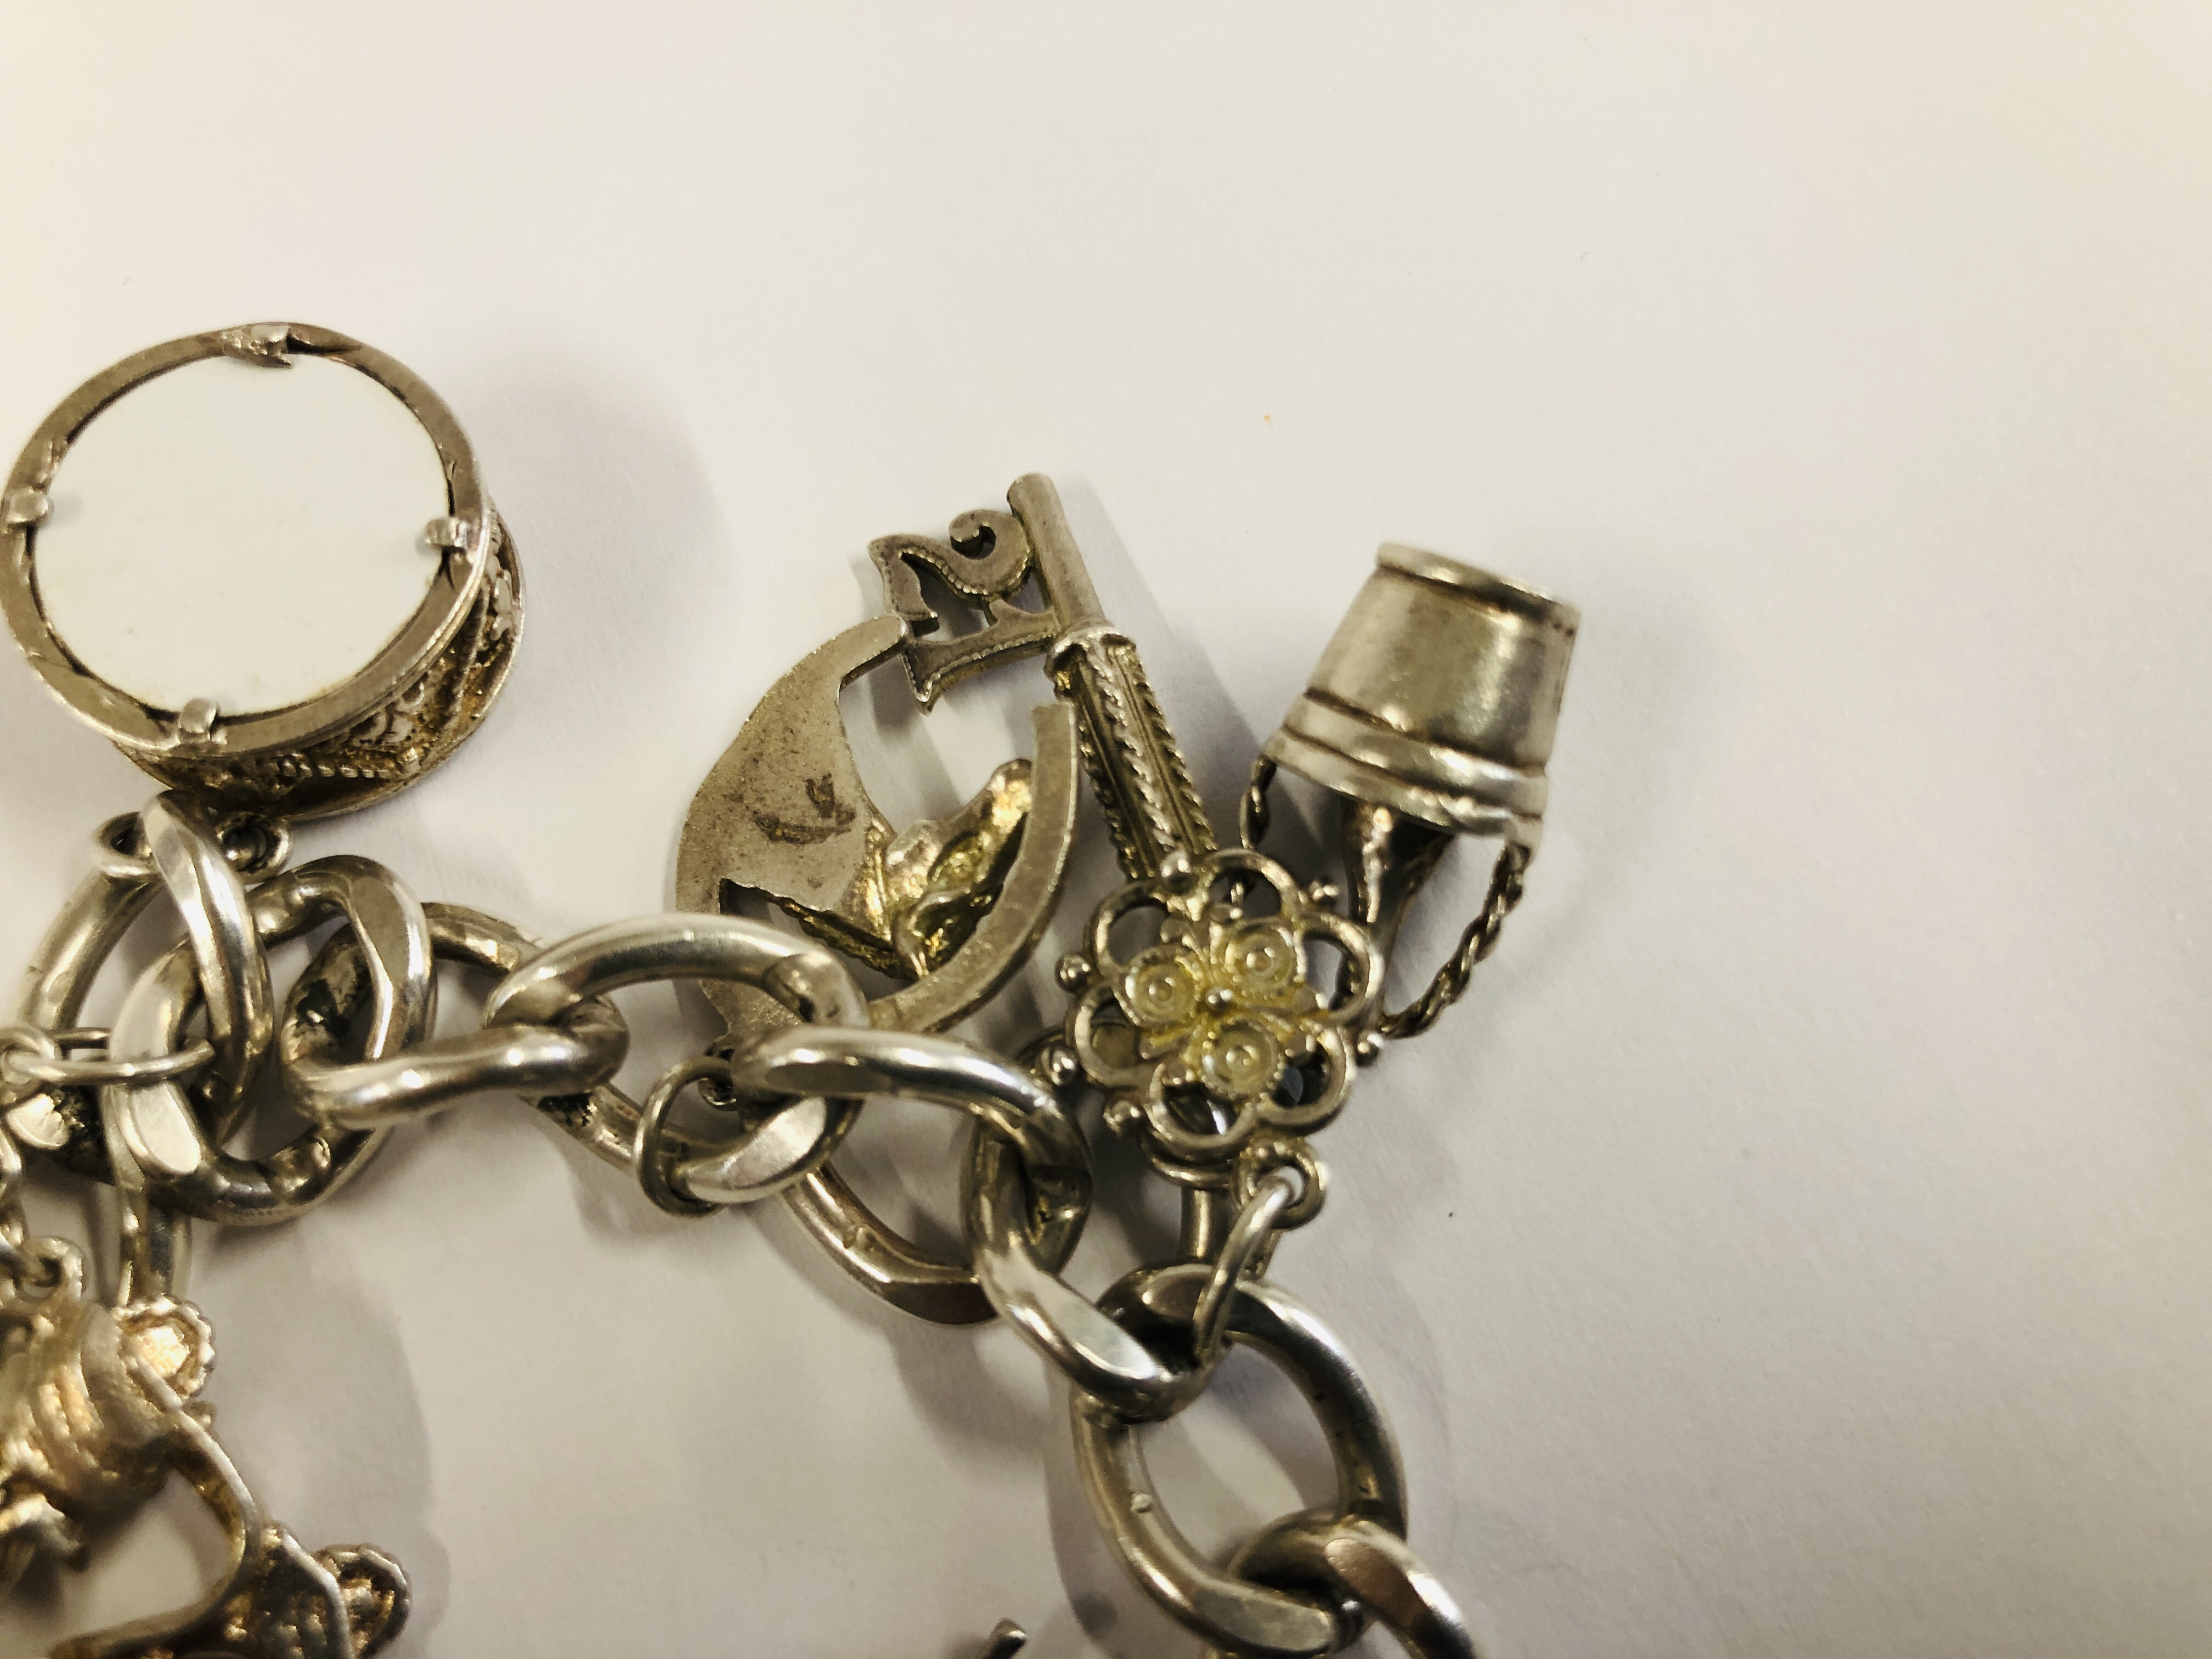 SILVER CHARM BRACELET WITH 13 CHARMS ATTACHED. - Image 5 of 6